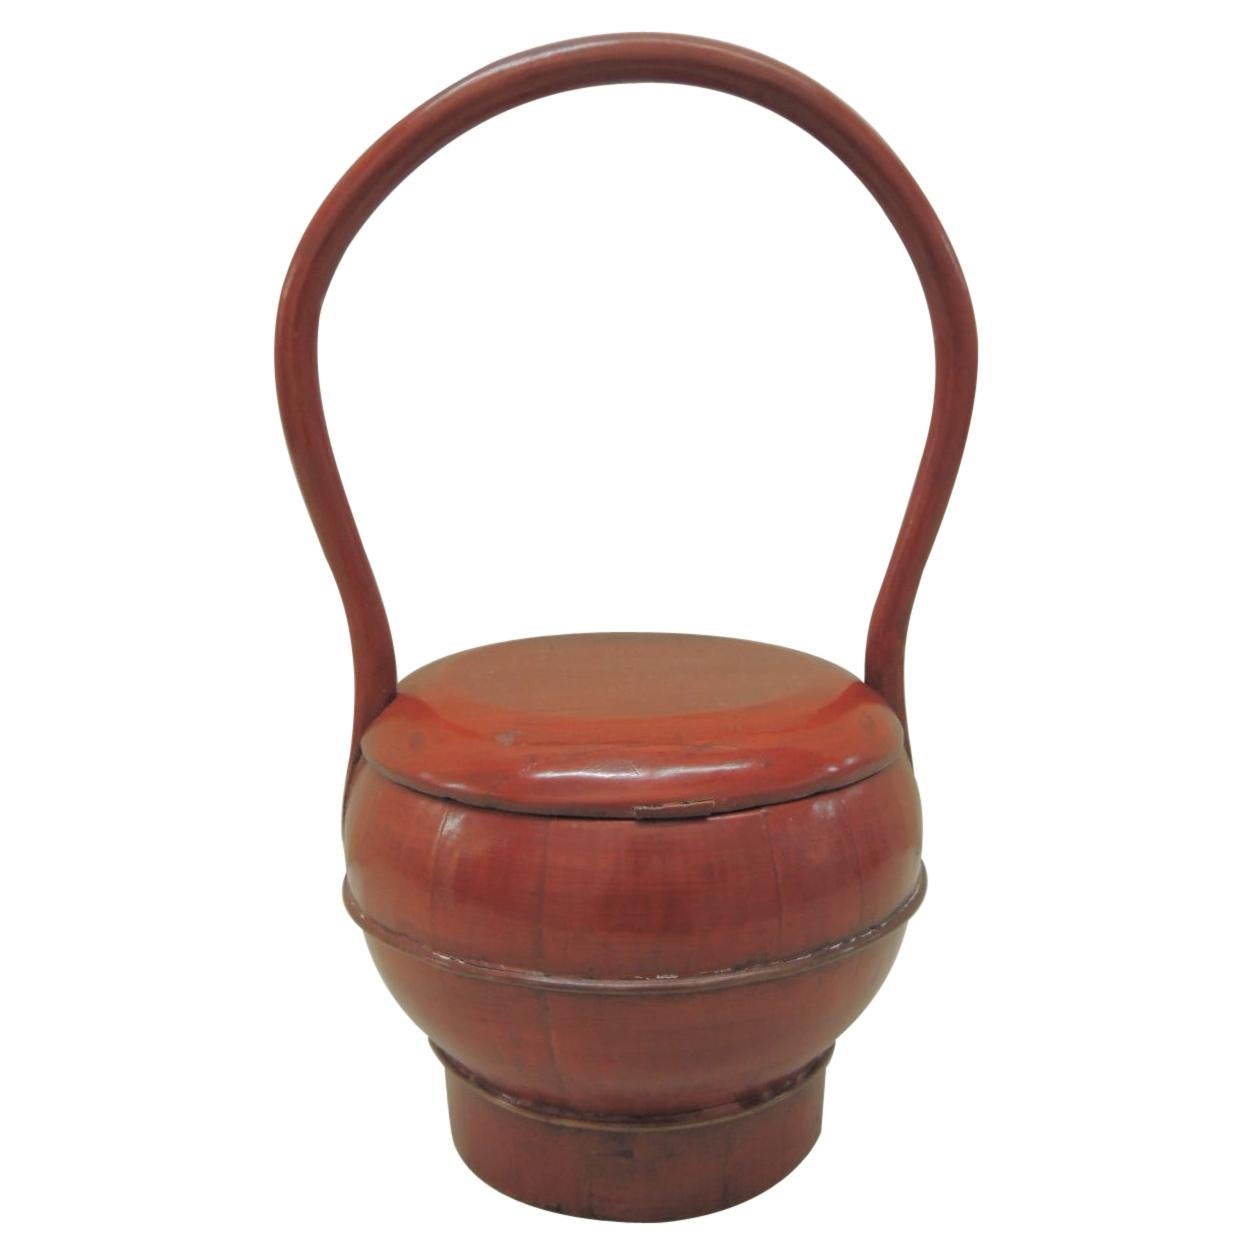 Red Lacquered Asian Basket with Lid